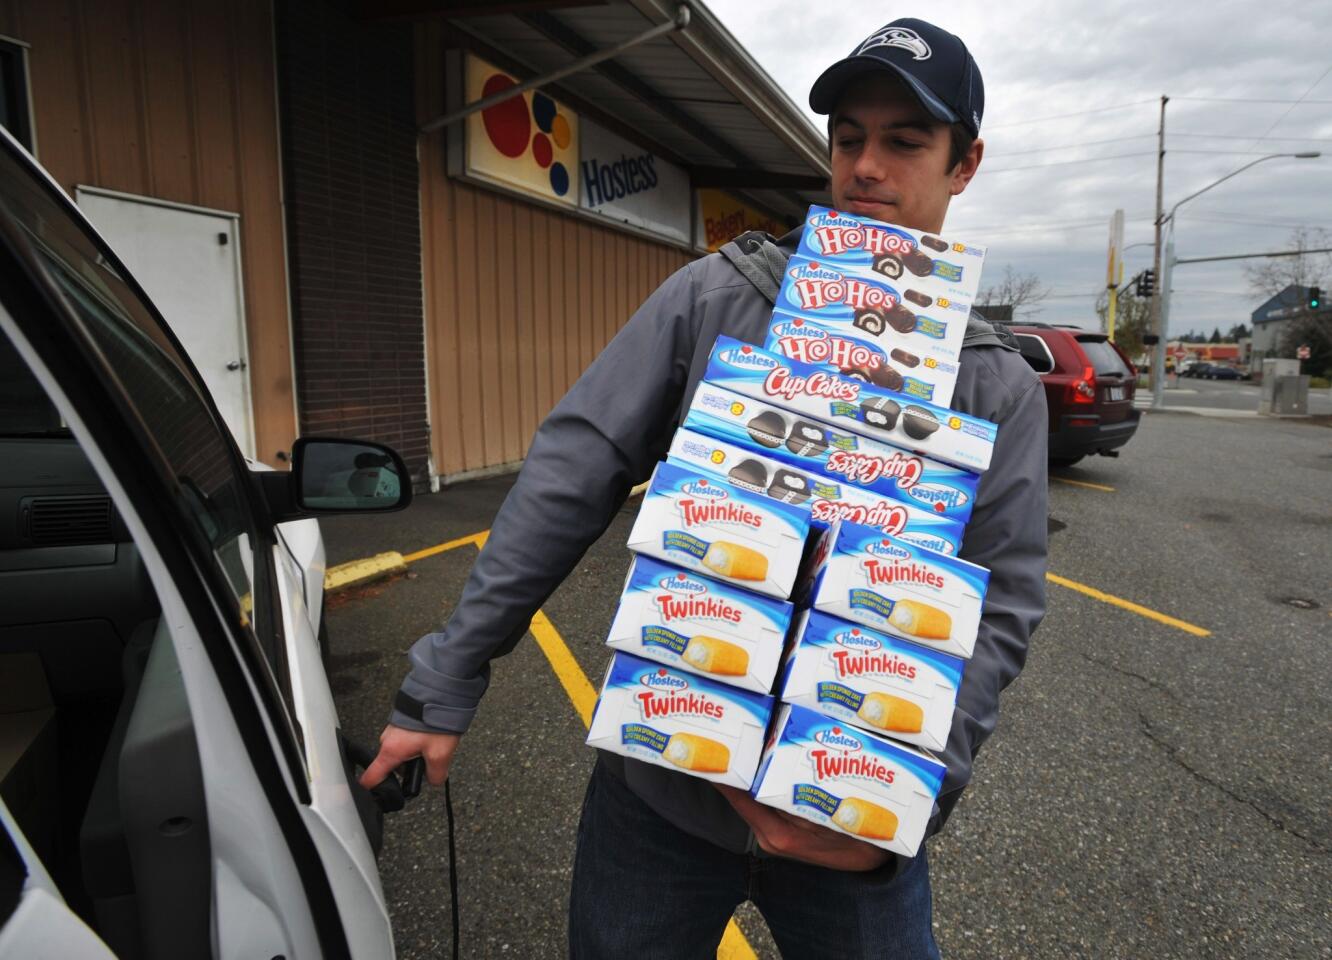 Andy Wagar loads Twinkies, Ho-Hos and Cup Cakes into a van outside the Wonder/Hostess Bakery Thrift Shop in Bellingham, Wash., after Hostess Brands Inc. said it would shut down.